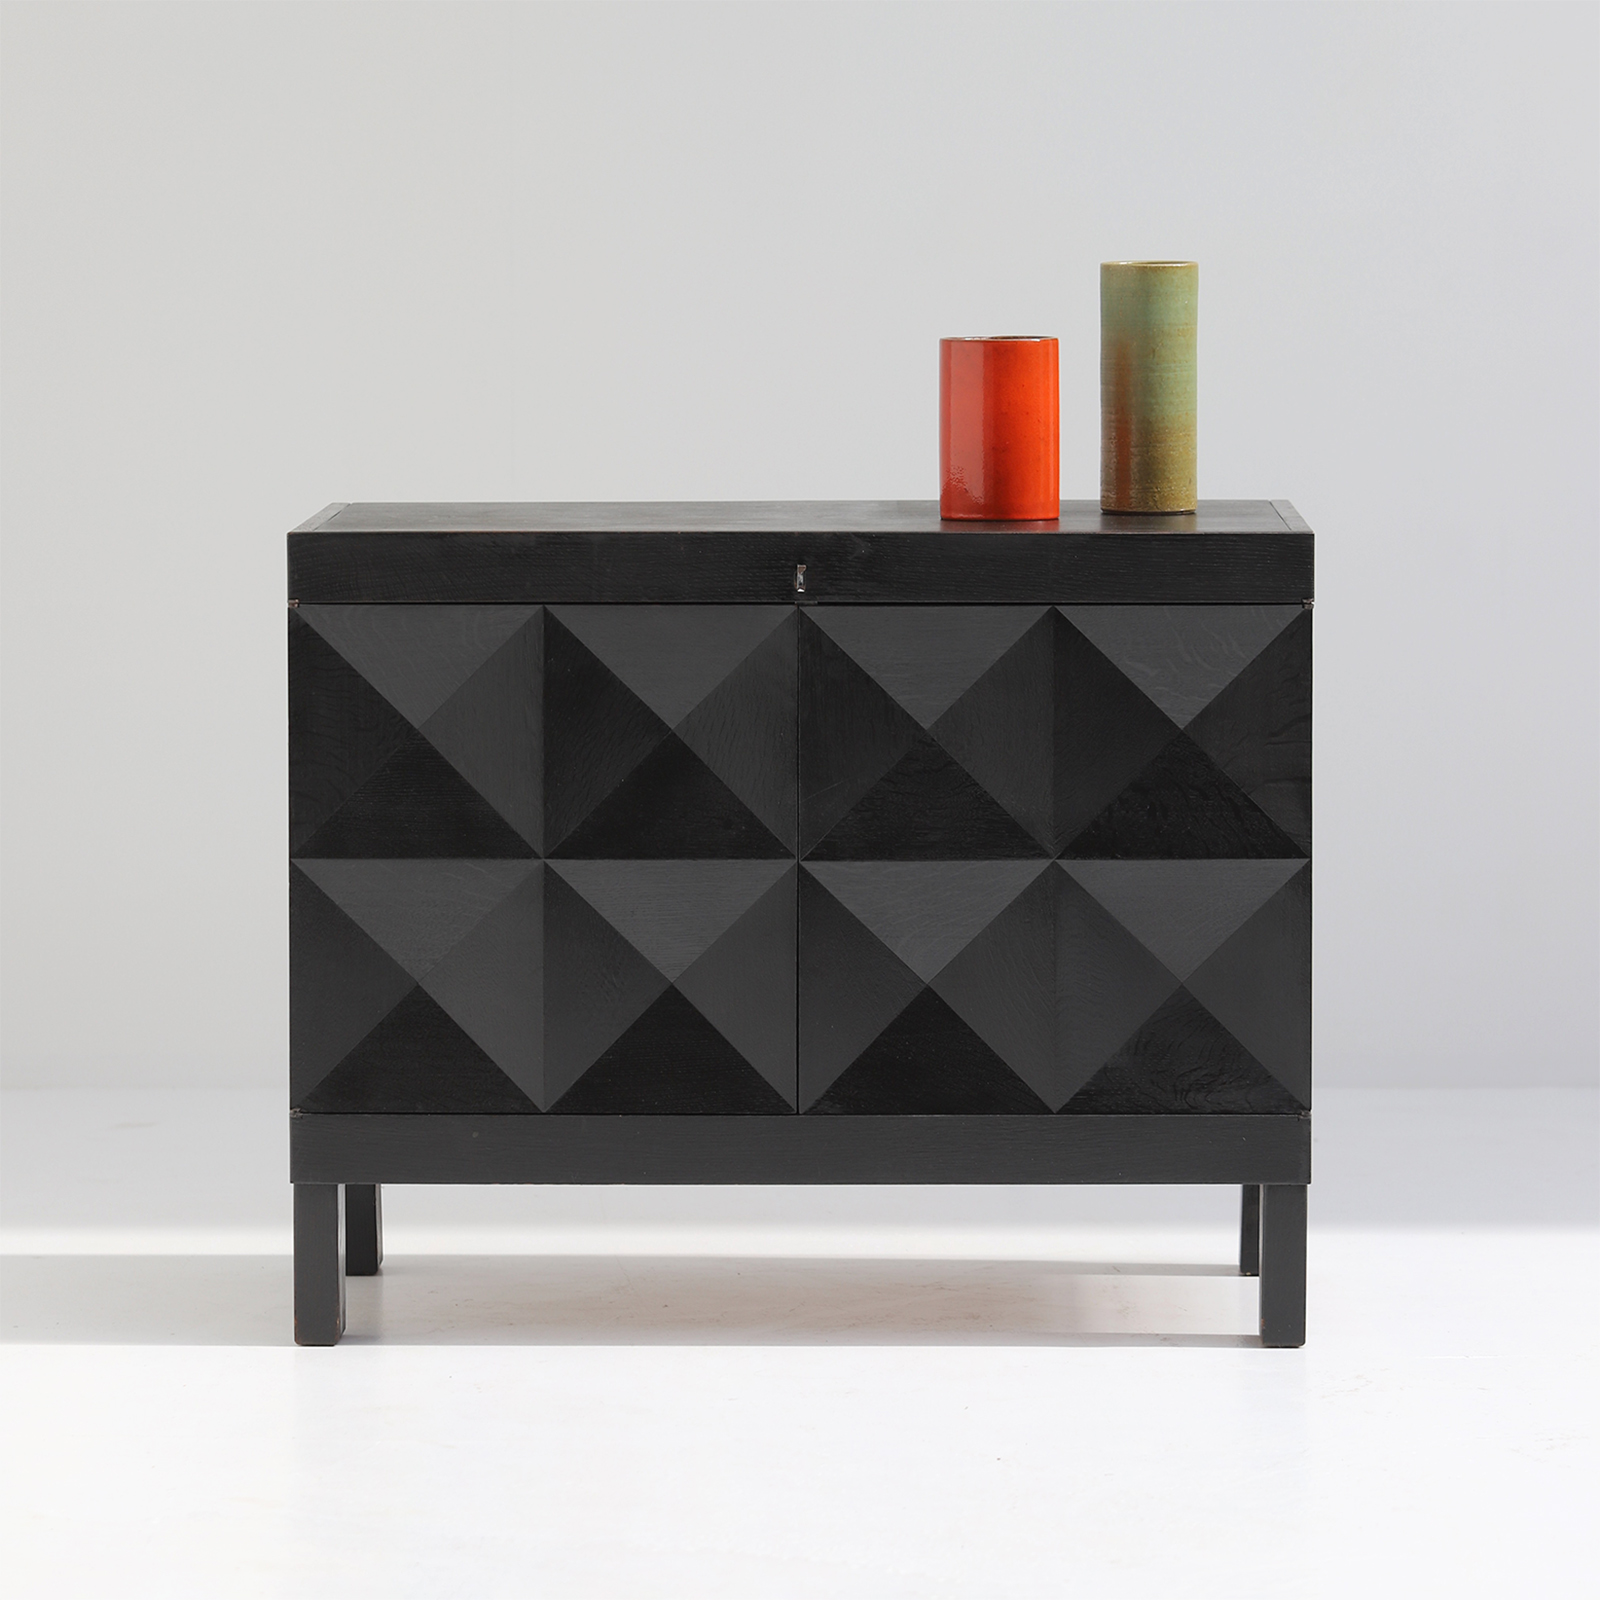 quality crafted cabinet with op-art doors designed by J. Batenburg for MI, Belgium 1969.